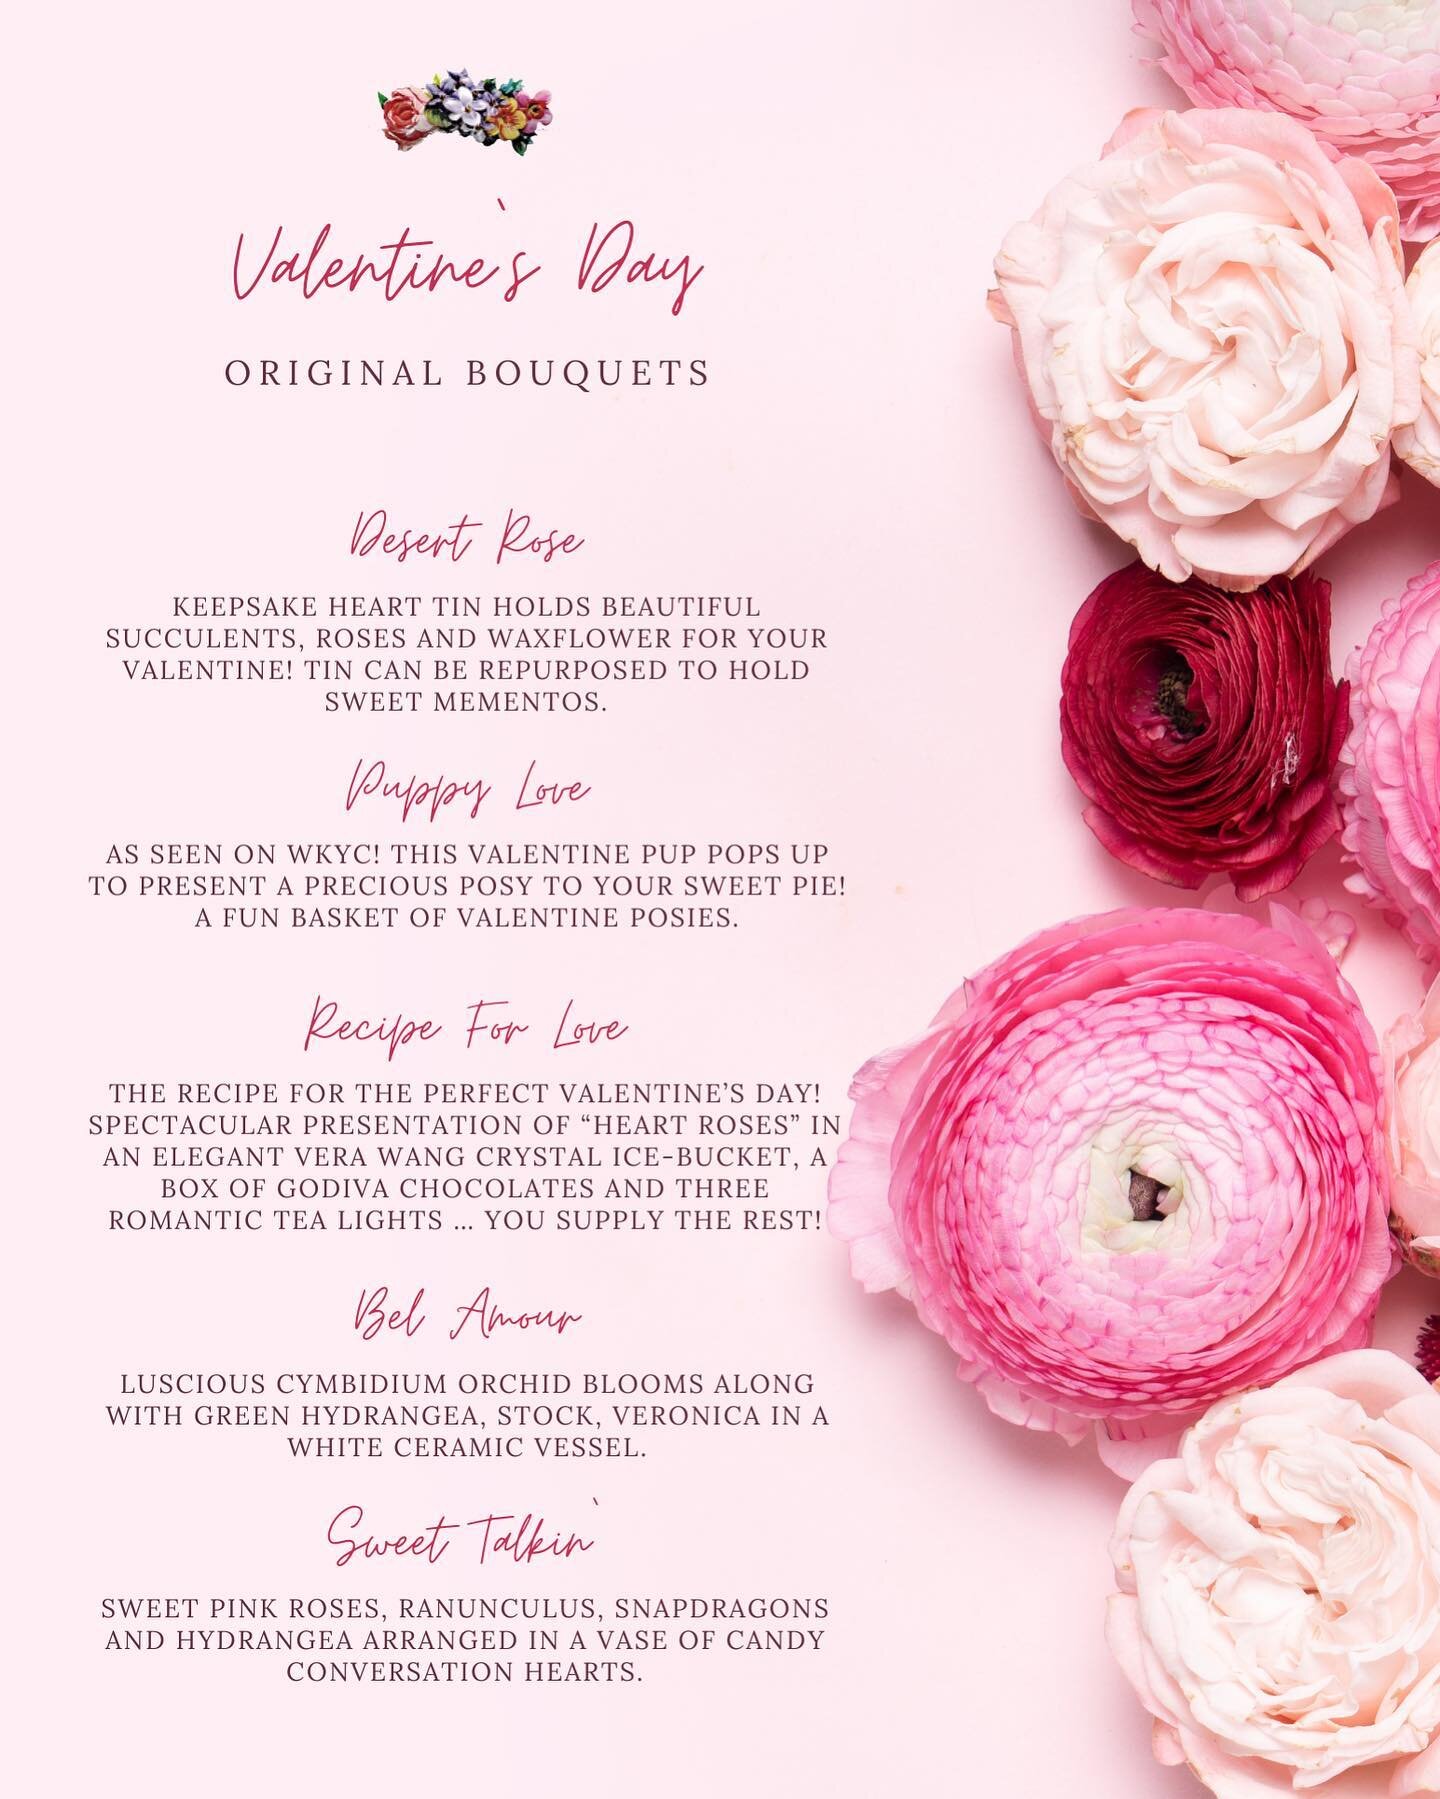 💗 It`s NOT too late to place orders for Valentine`s Day! Our designer`s have curated a wide variety of romantic and friendly bouquets designed for any Valentine on your list. We are so happy to bring people closer together through fresh floral deliv